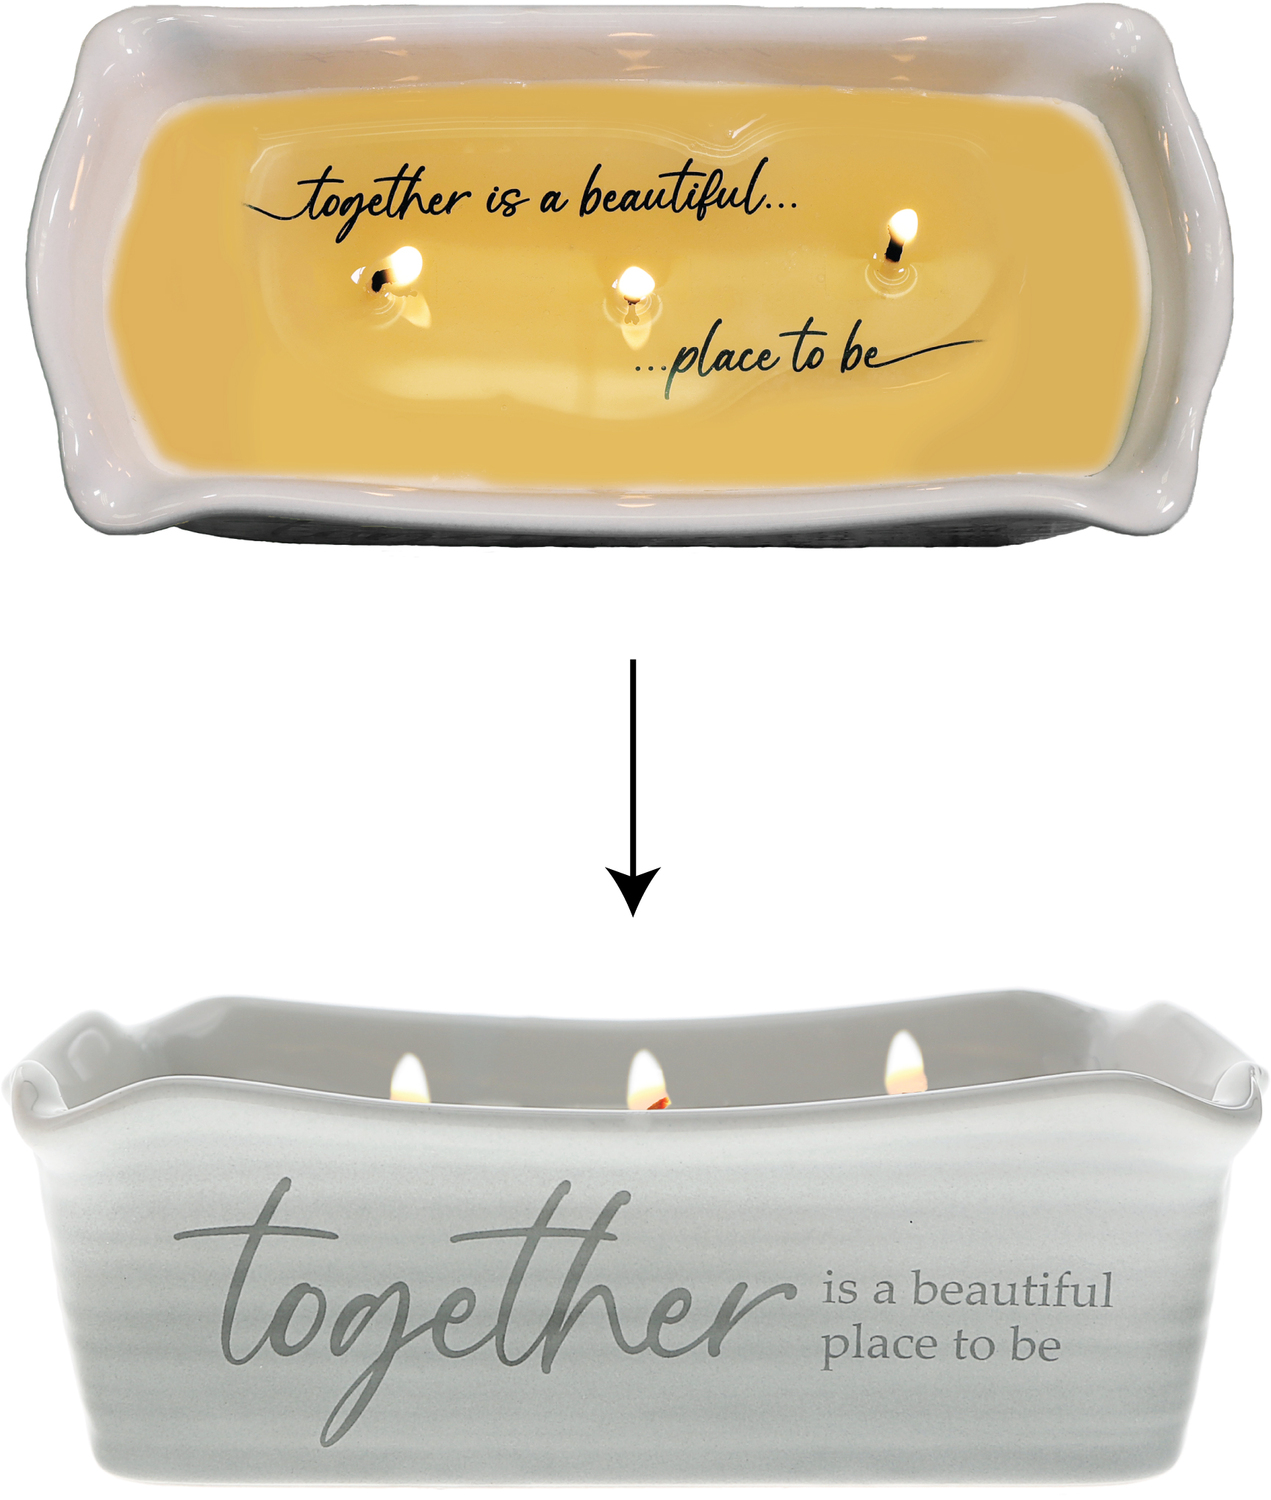 Together by Thoughts of Home - Together - 12 oz - 100% Soy Wax Reveal Triple Wick Candle
Scent: Tranquility